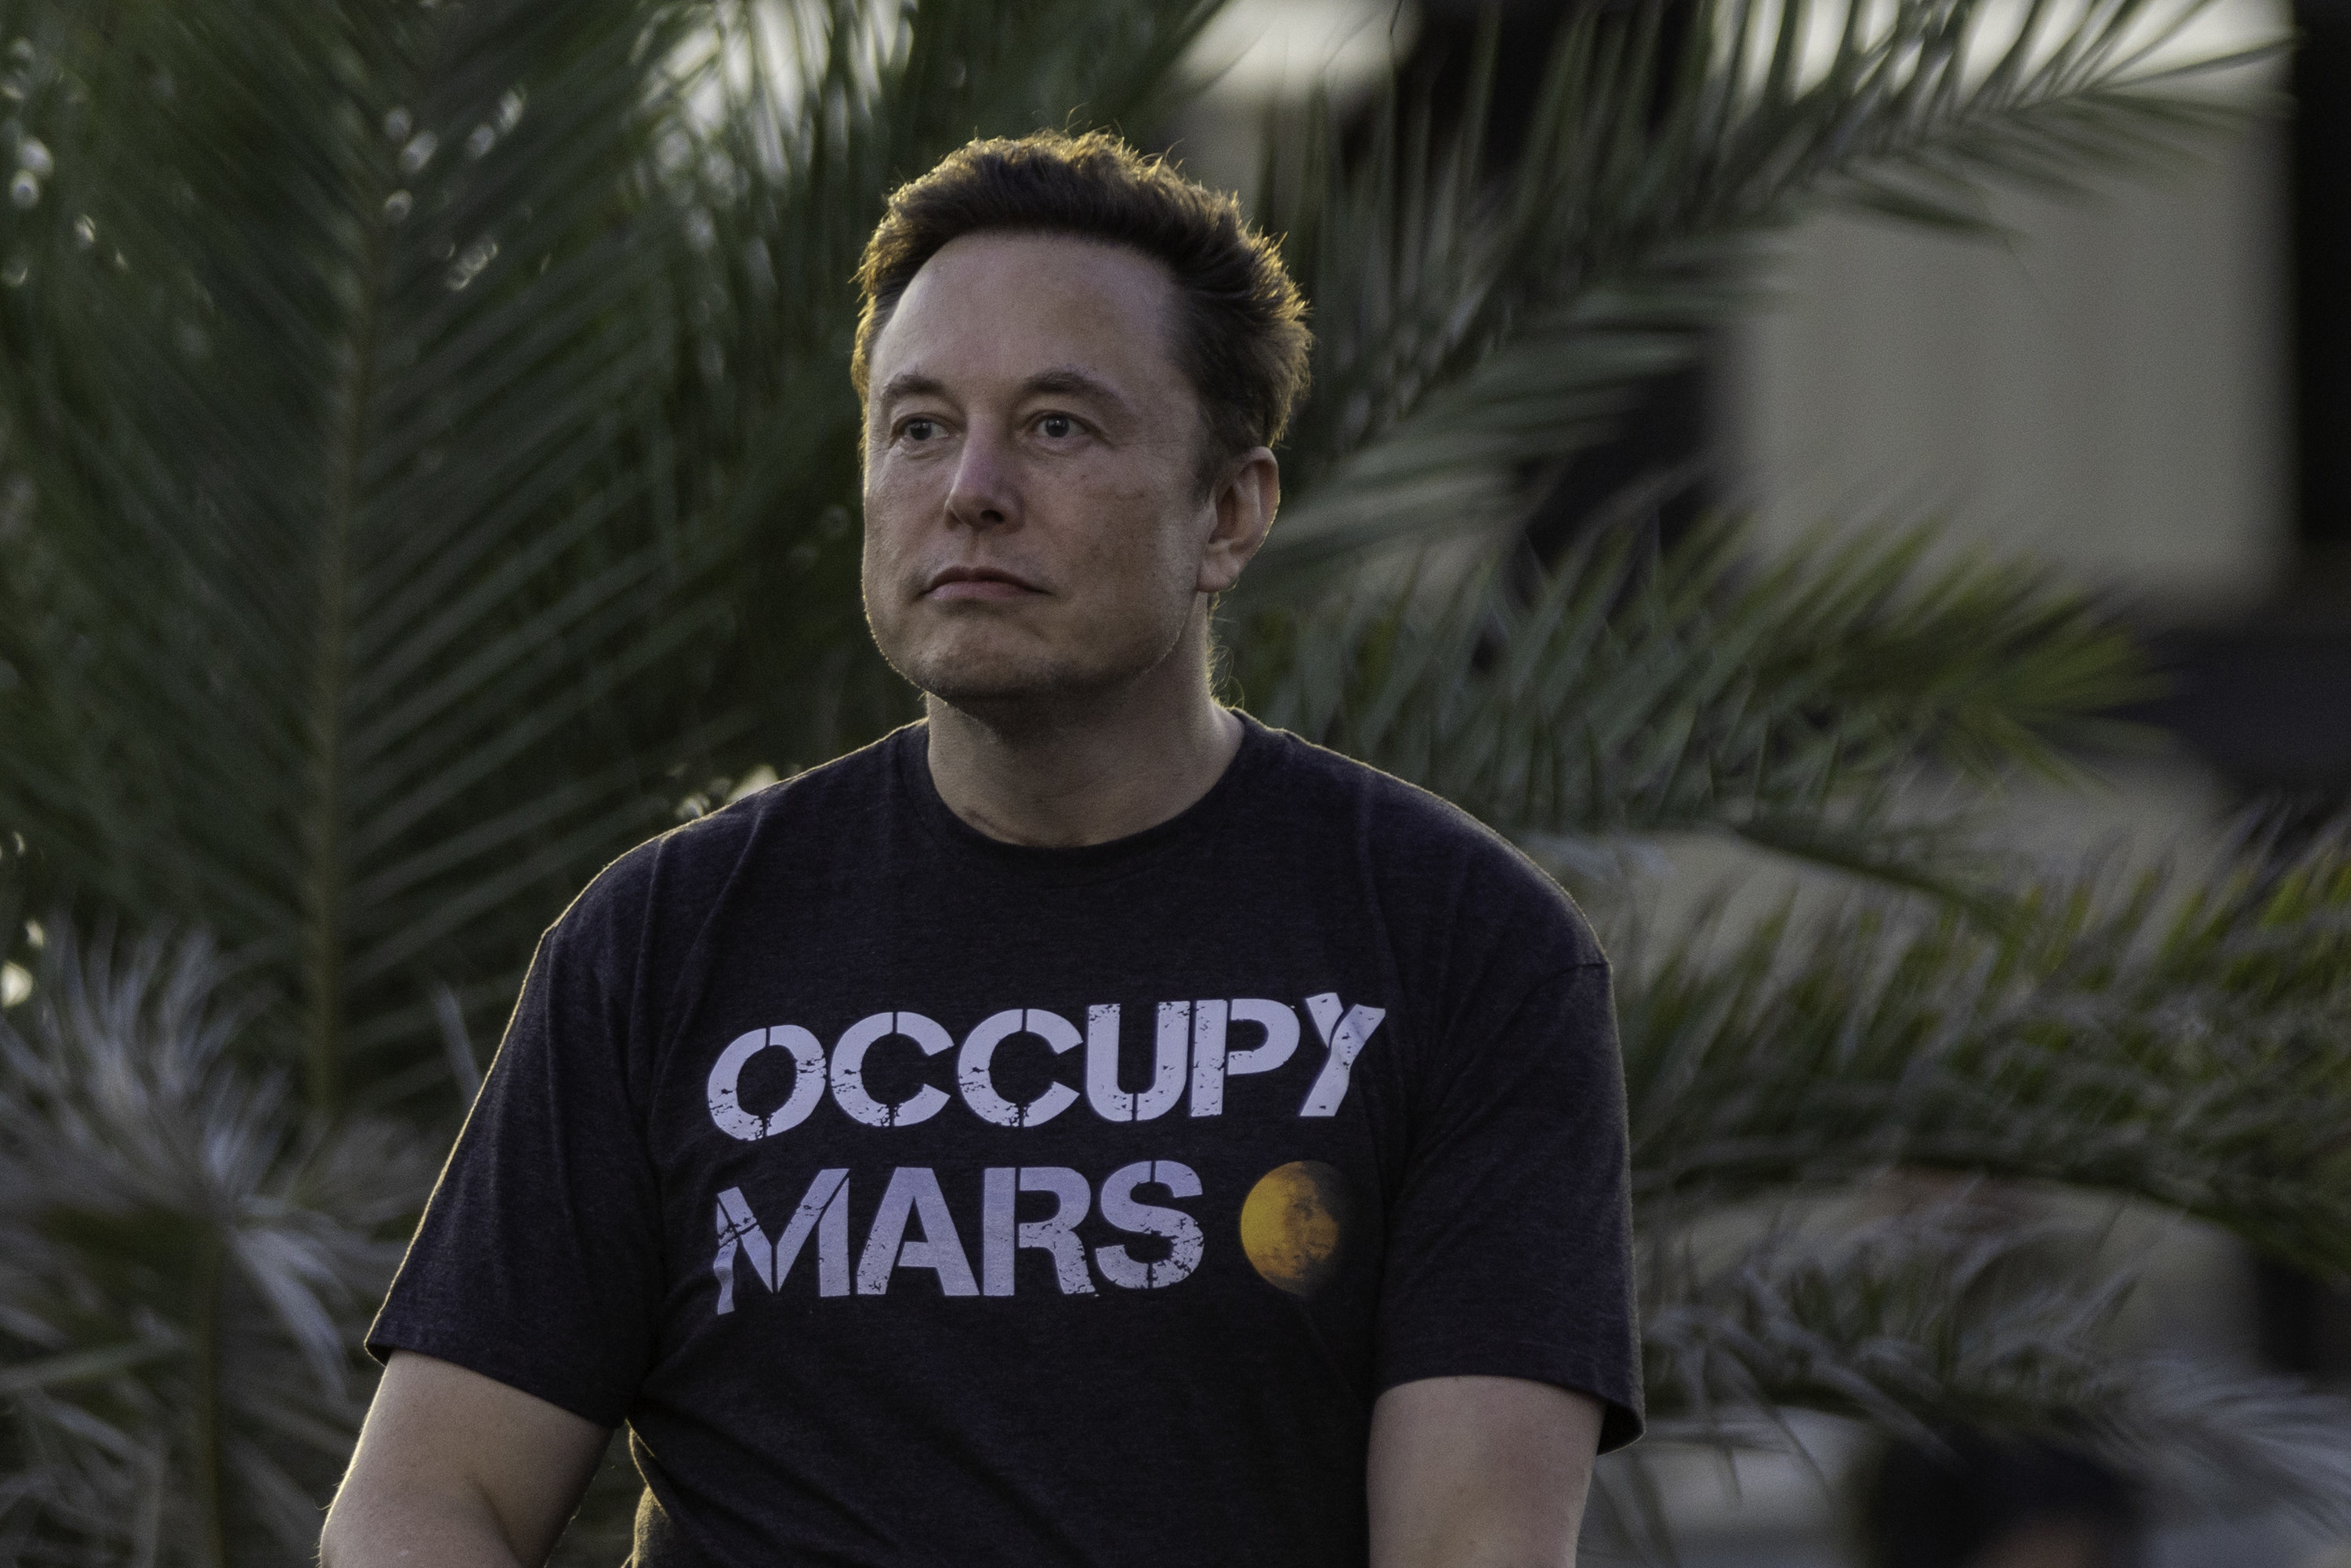 SpaceX founder Elon Musk during a T-Mobile and SpaceX joint event on August 25, 2022